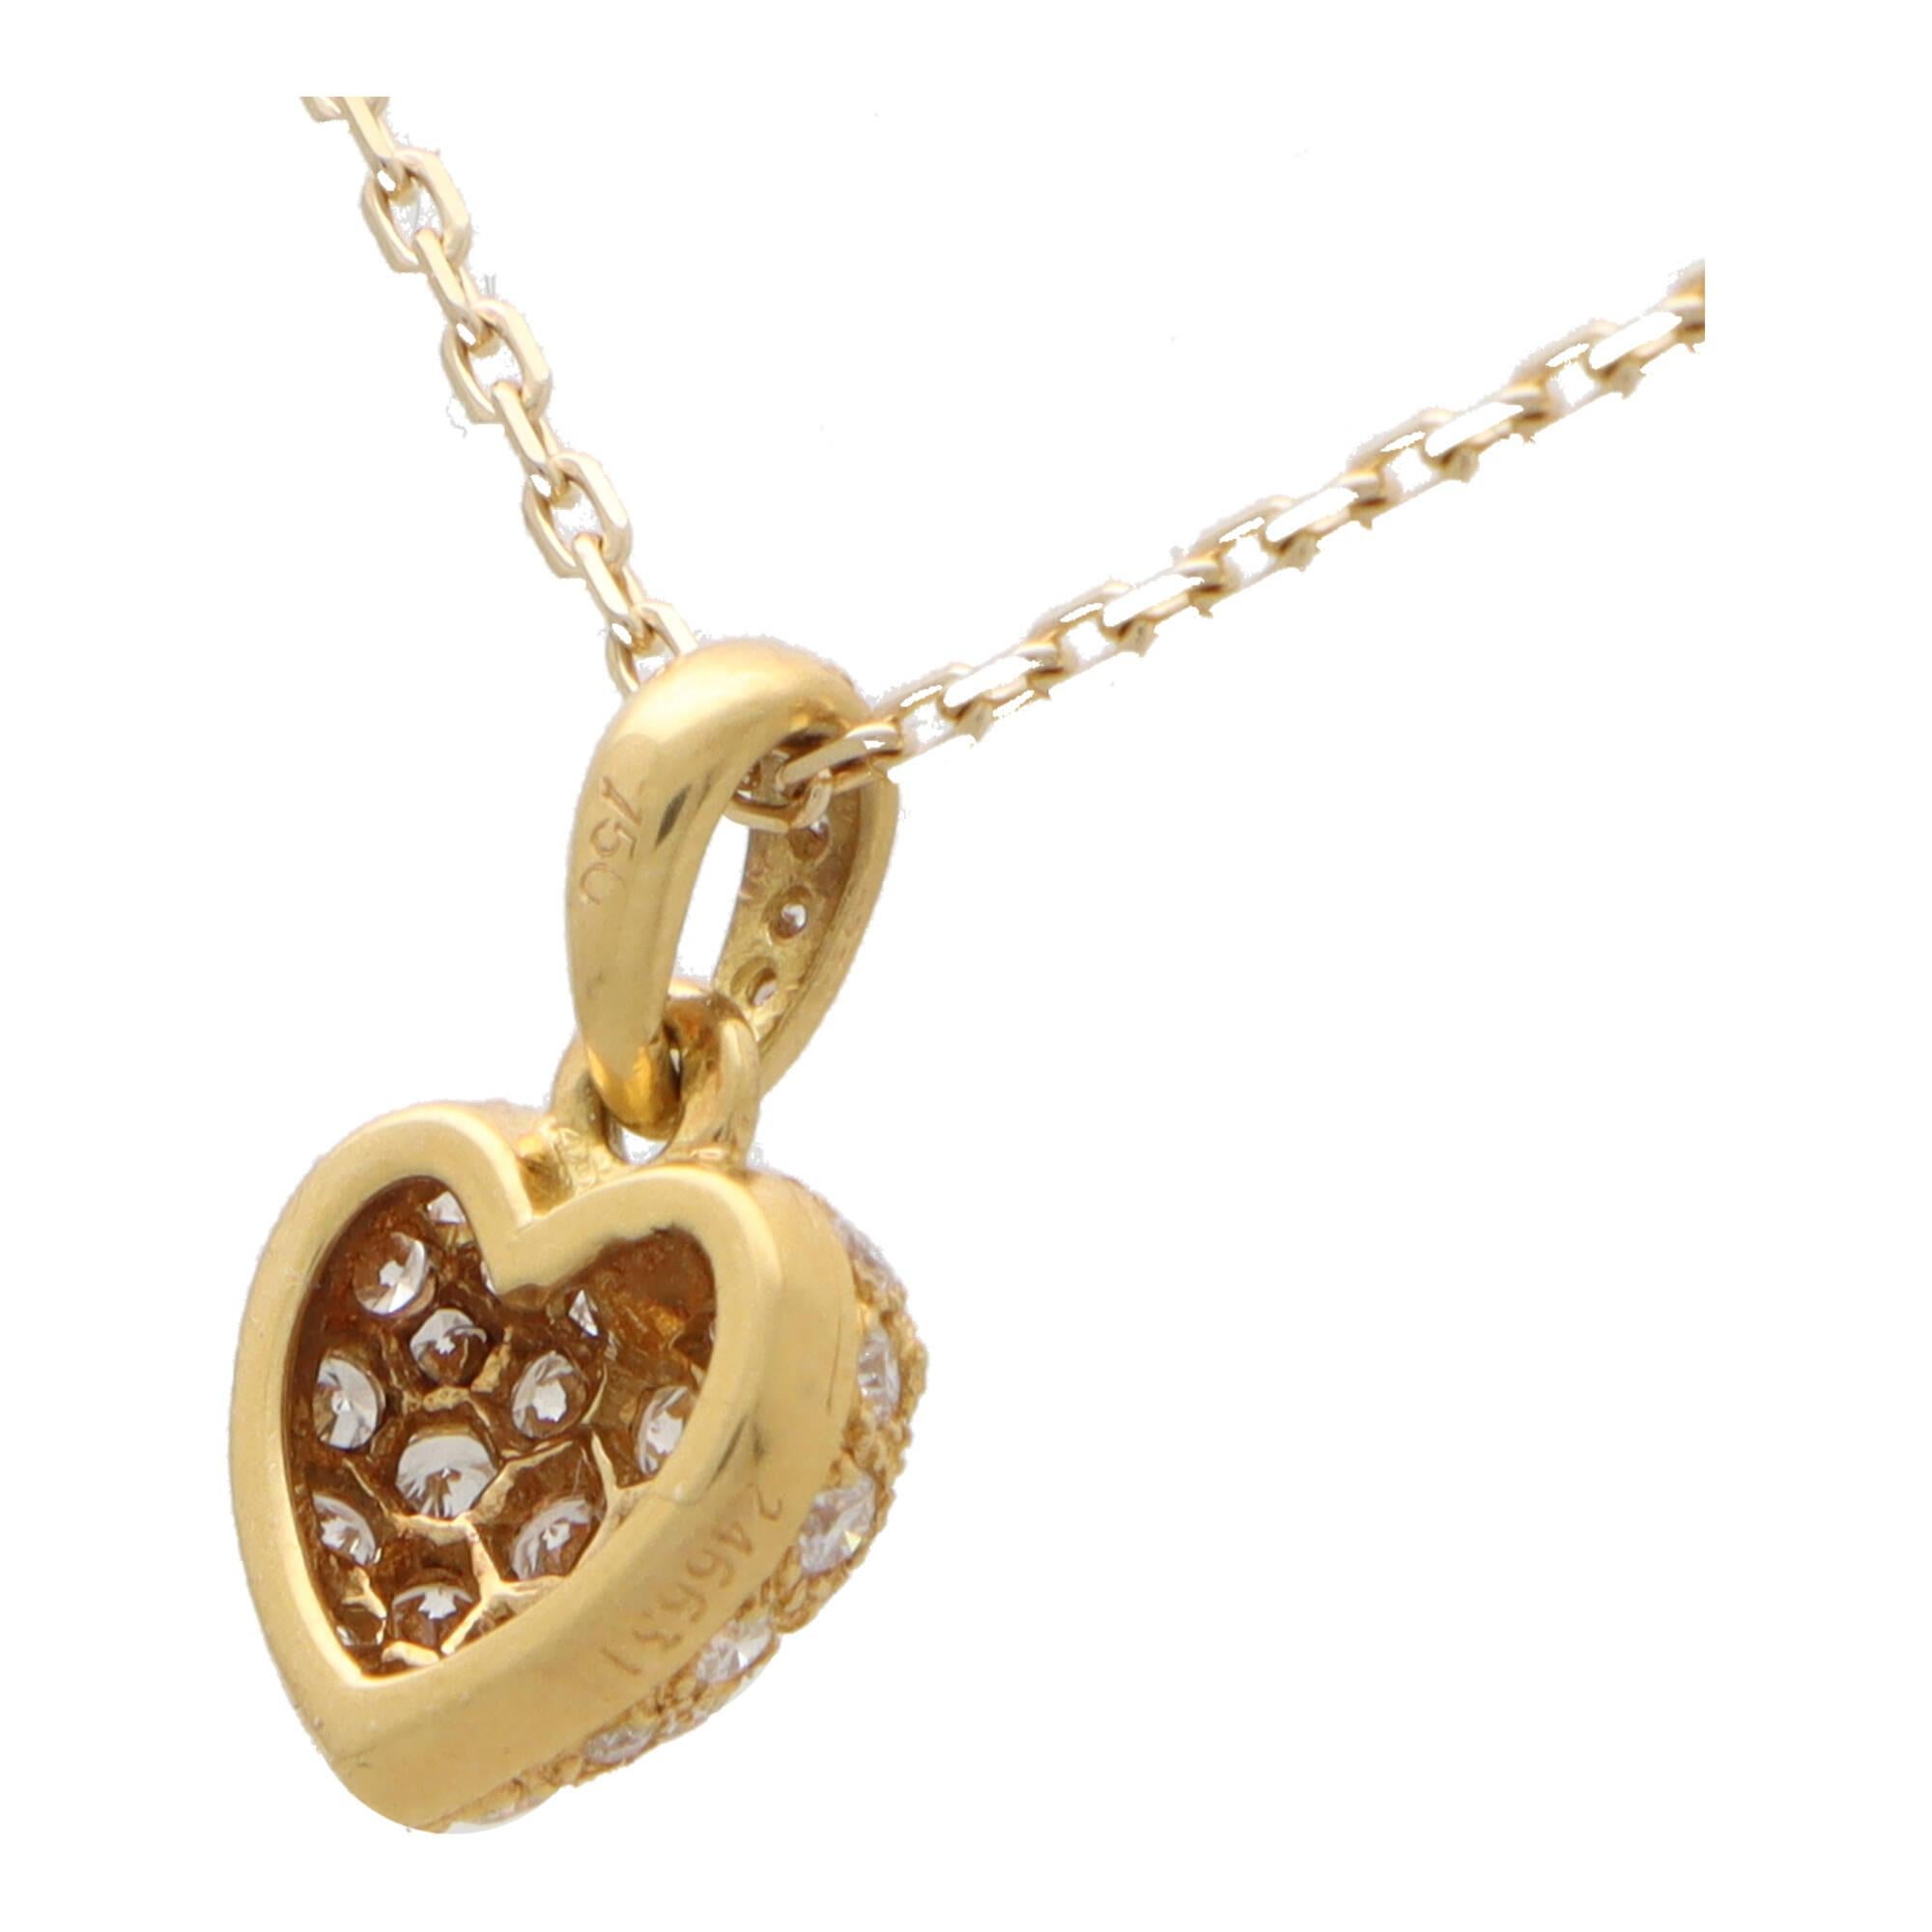 A beautiful vintage Cartier diamond heart pendant necklace set in 18k yellow gold.

From a now discontinued 1990’s Cartier collection, the pendant depicts a classic heart motif. The pendant is pave set with approximately 30 round brilliant cut